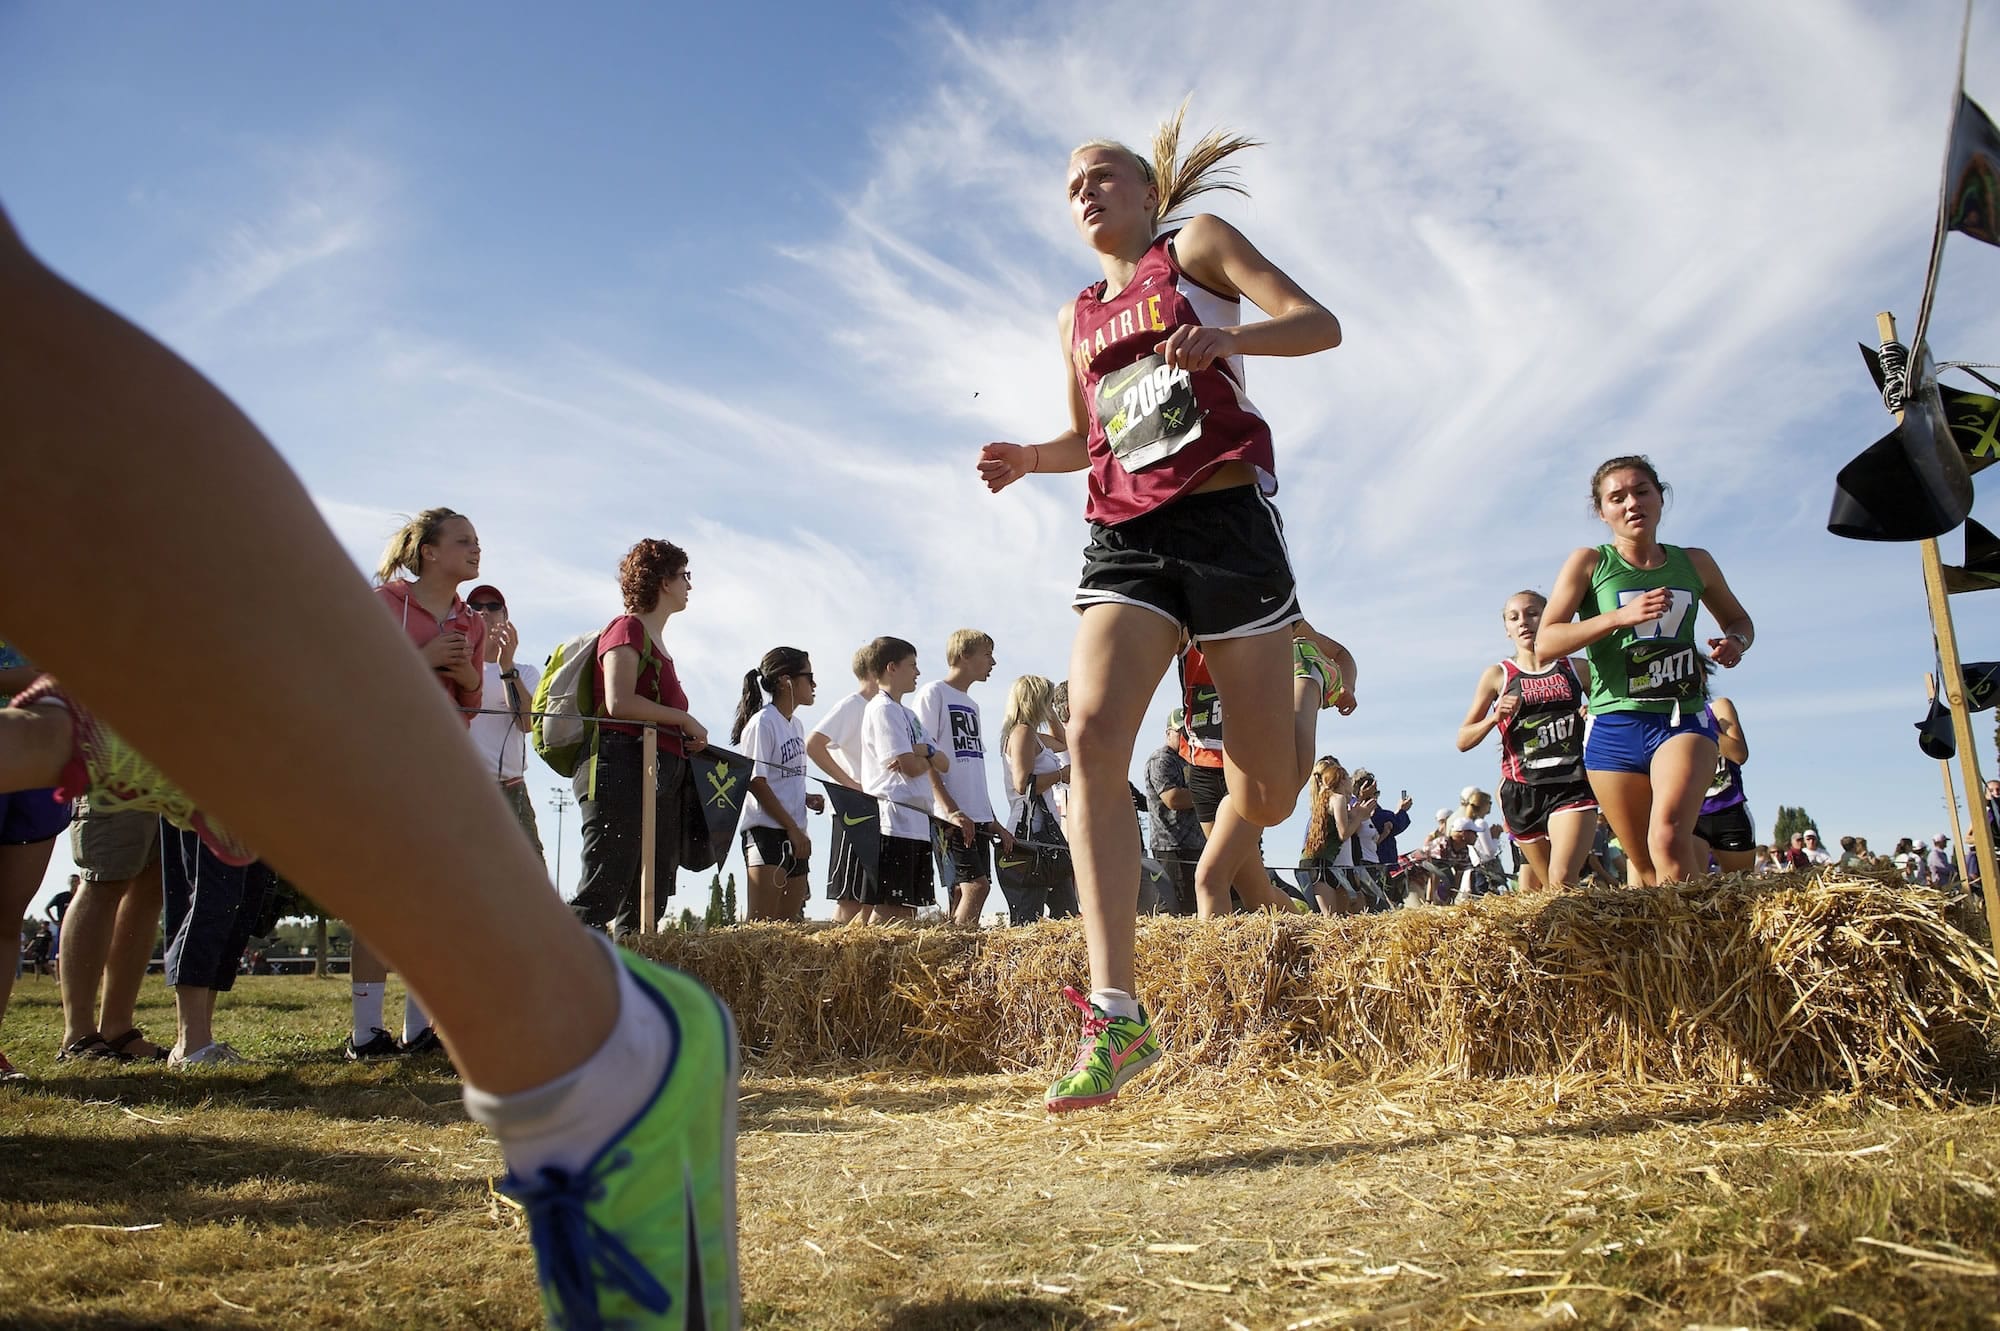 Nicole Goecke of Prairie High School competes in the Jim Danner girls race at the 2012 Pre National Cross Country meet Saturday September 29, 2012 in Portland, Oregon.()